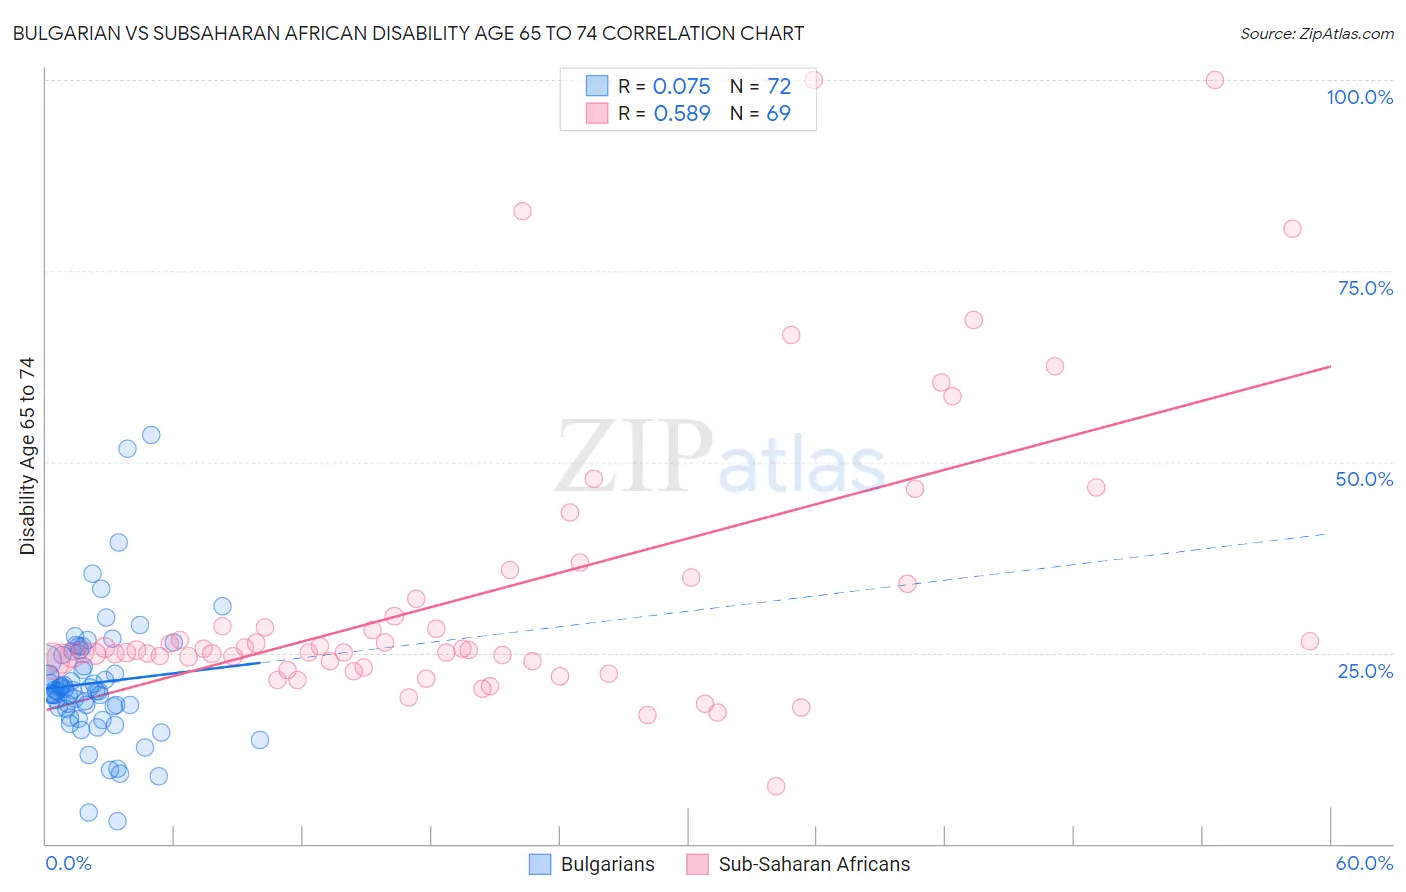 Bulgarian vs Subsaharan African Disability Age 65 to 74